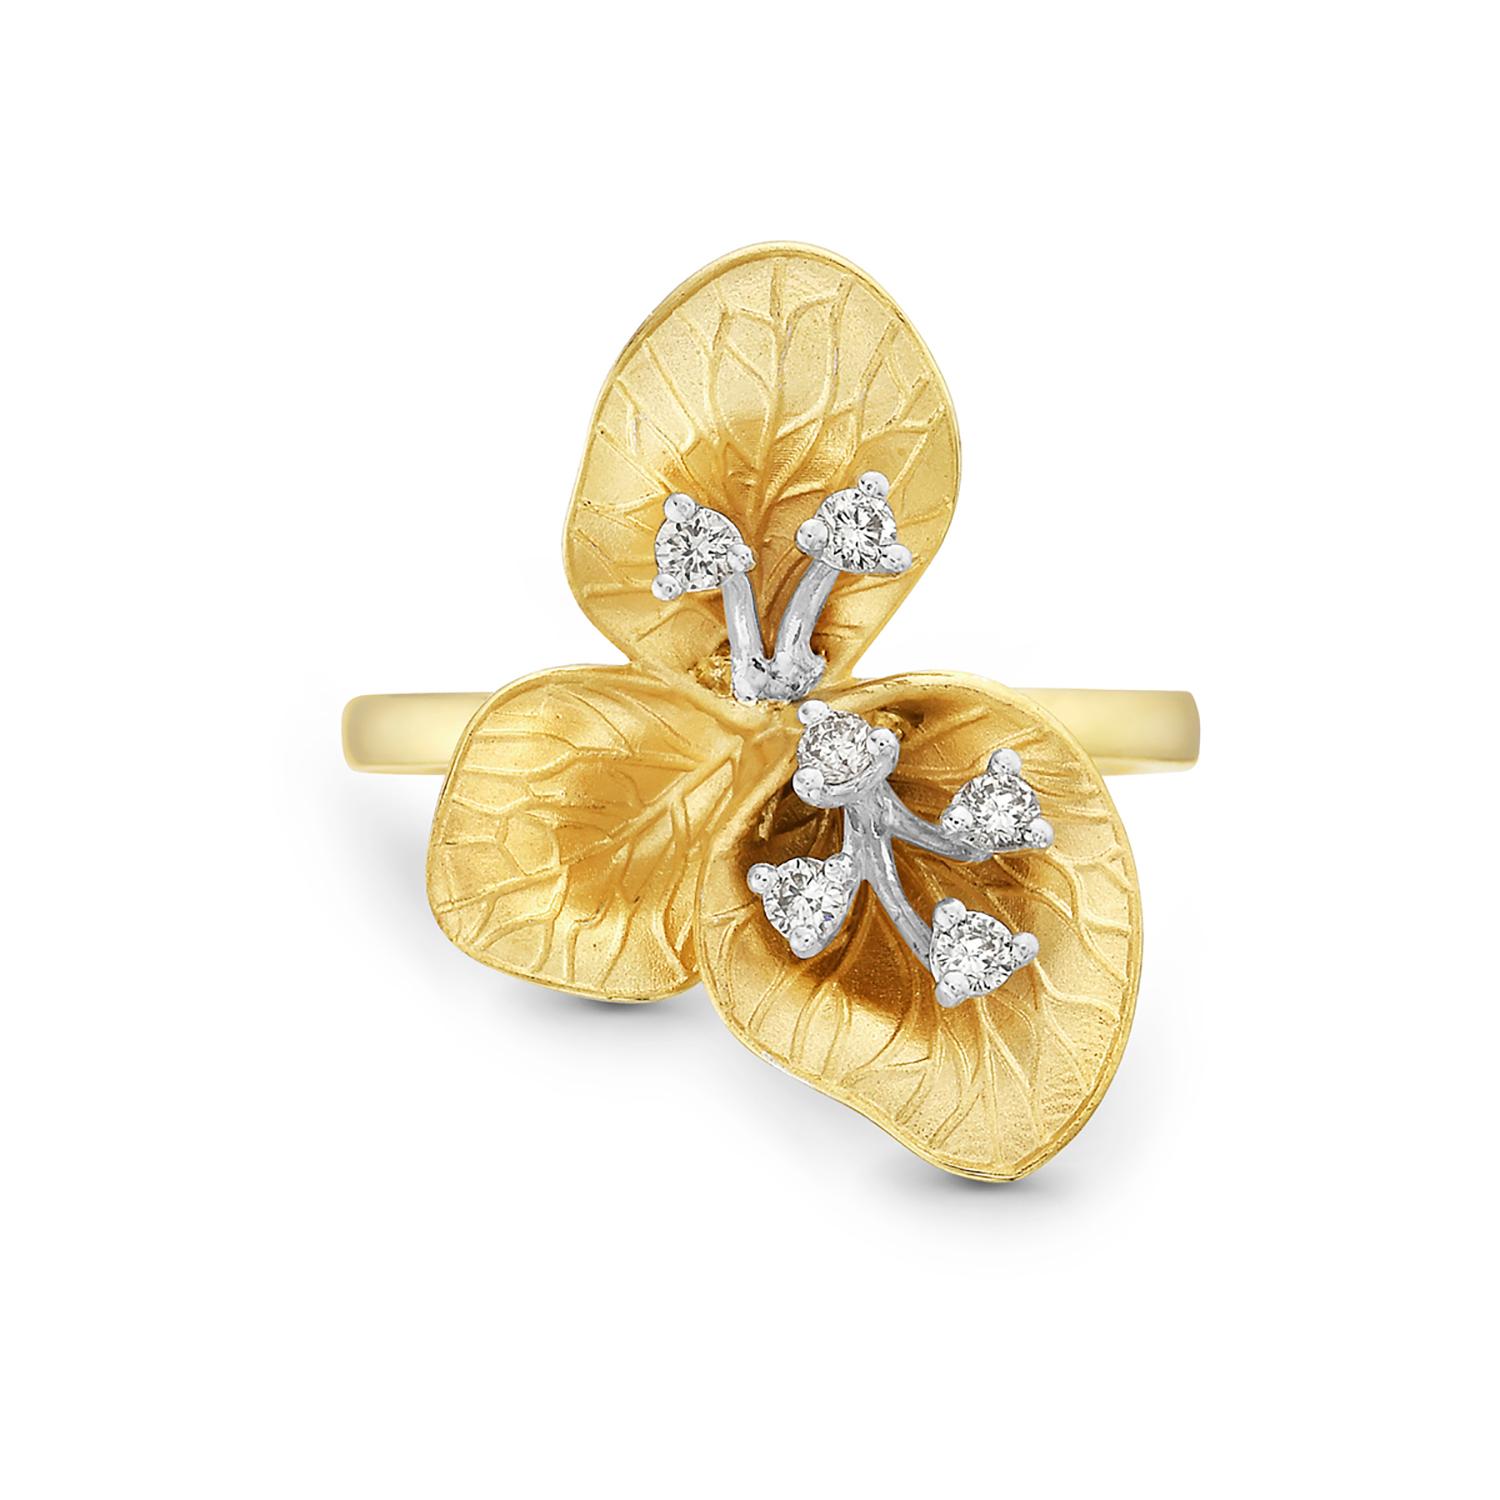 Contemporary Clover Leaves Shaped Carved Ring Made in 14k Yellow Gold with Diamond Buds For Sale